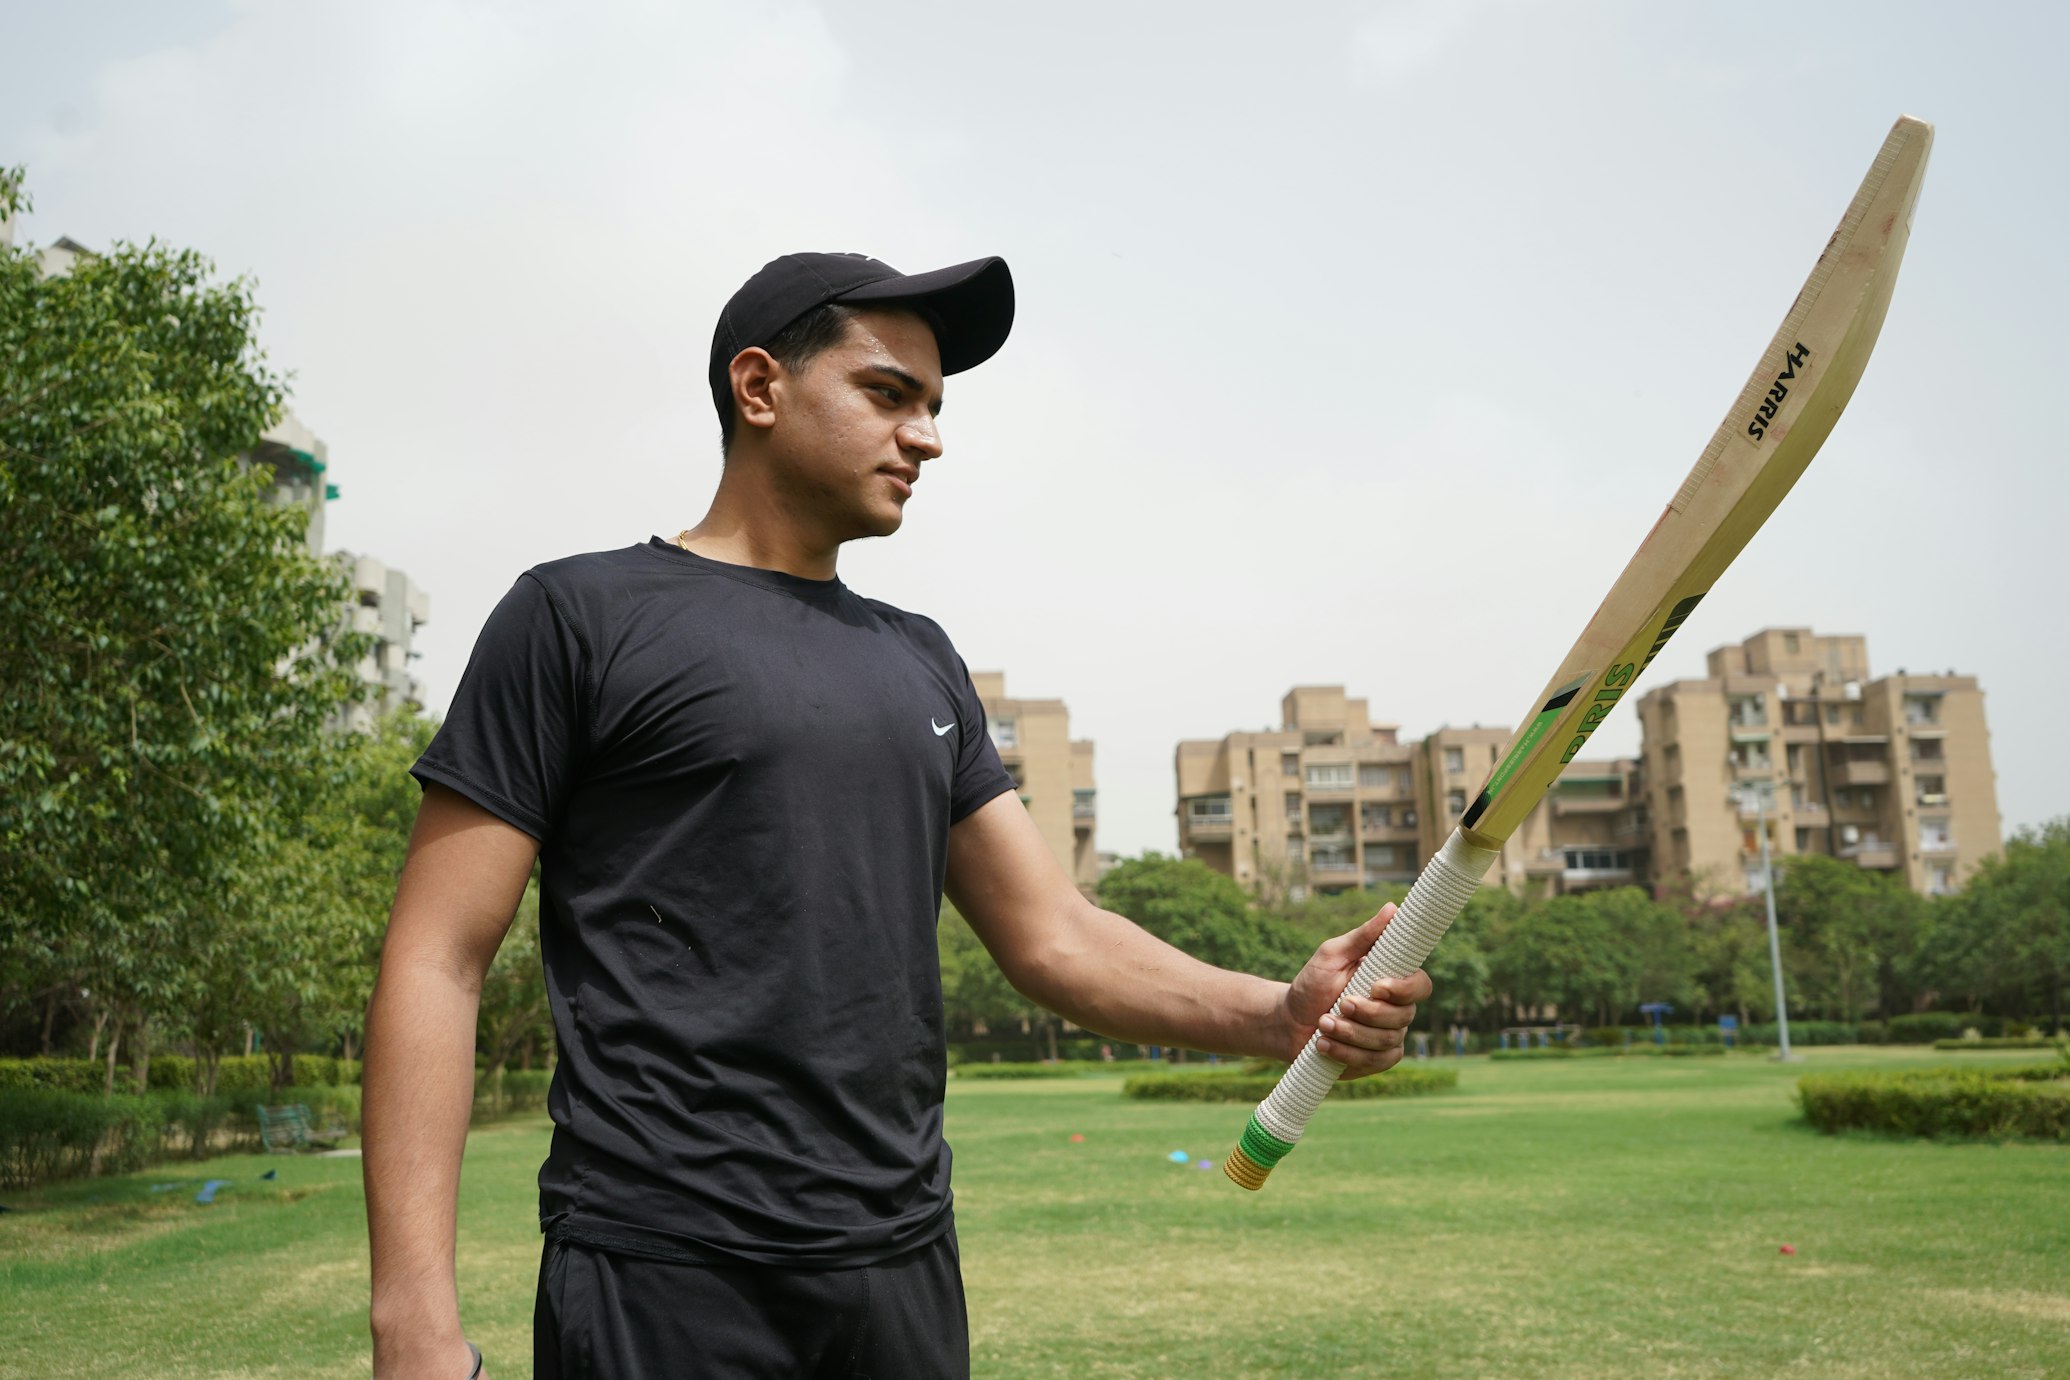 The Psychological Connection: How a Cricket Bat Can Influence a Batsman’s Confidence and Performance